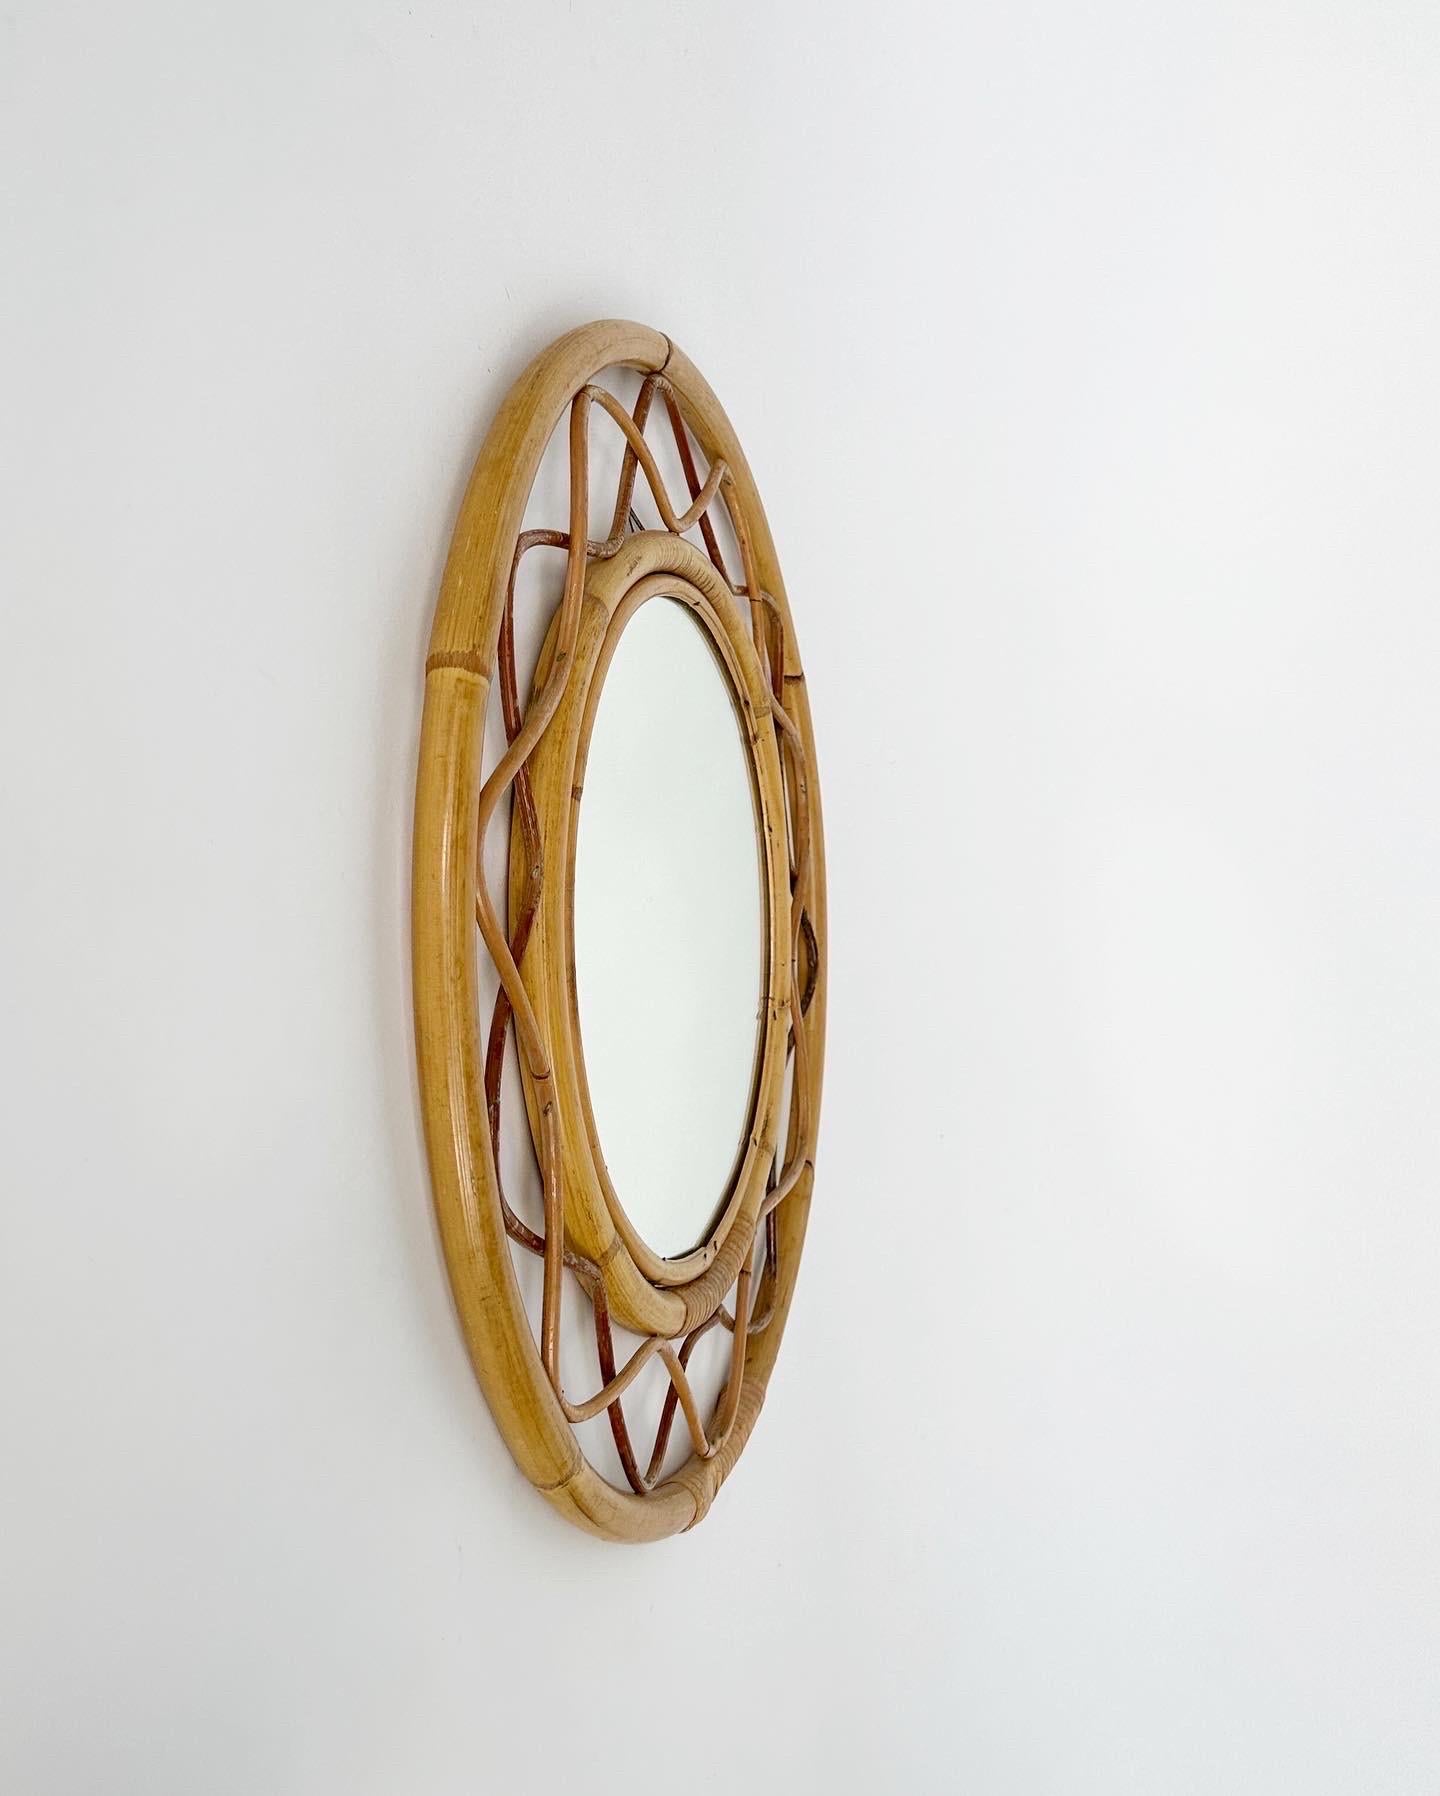 Hand-Crafted Swedish Bamboo Mirror Ornamental Frame 1950s In the Style of Josef Frank  For Sale